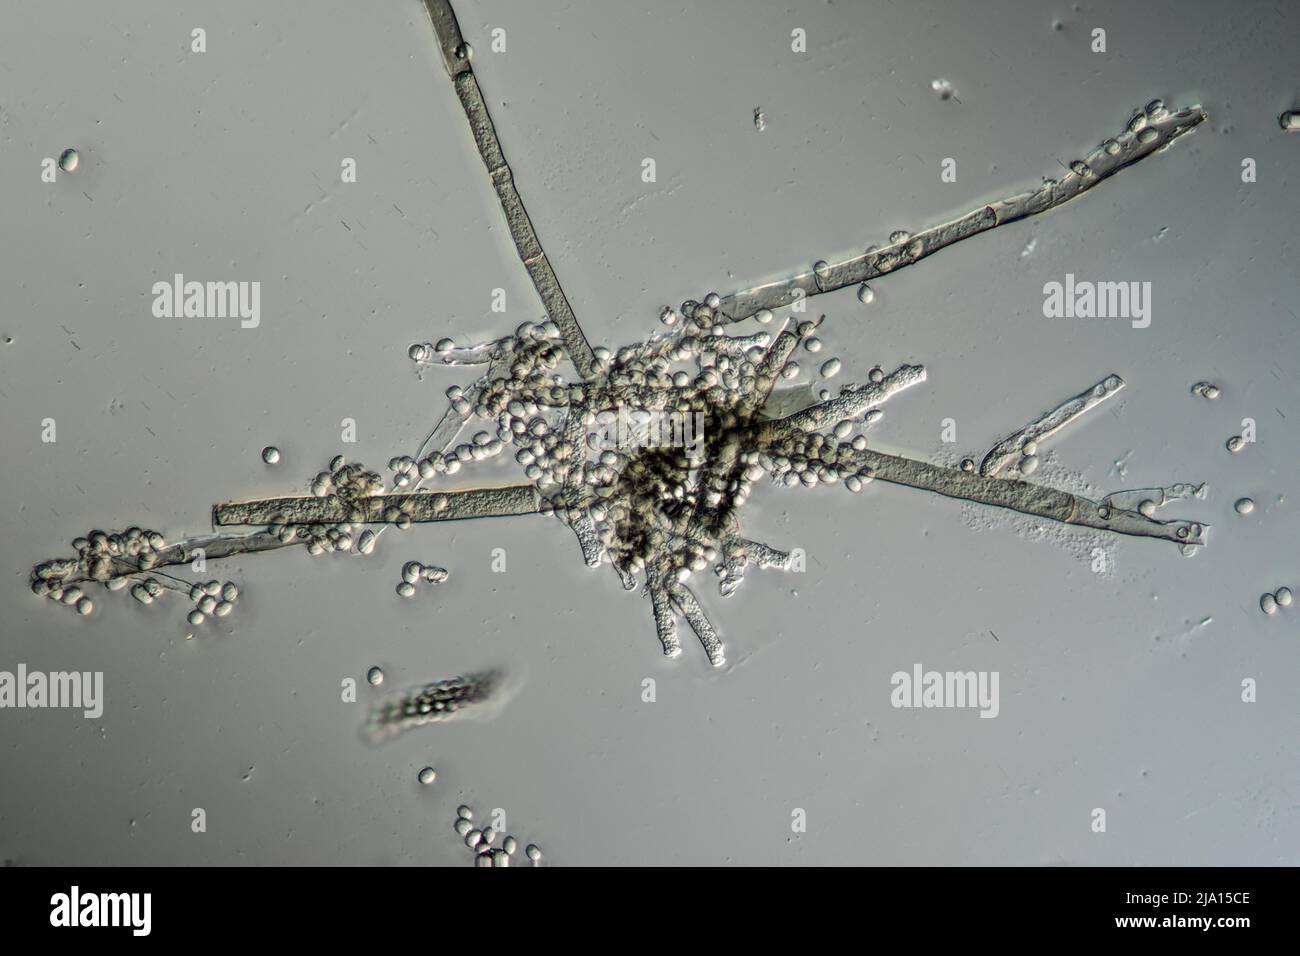 Mold filaments and spores from the Aspergillus mold under the microscope Stock Photo